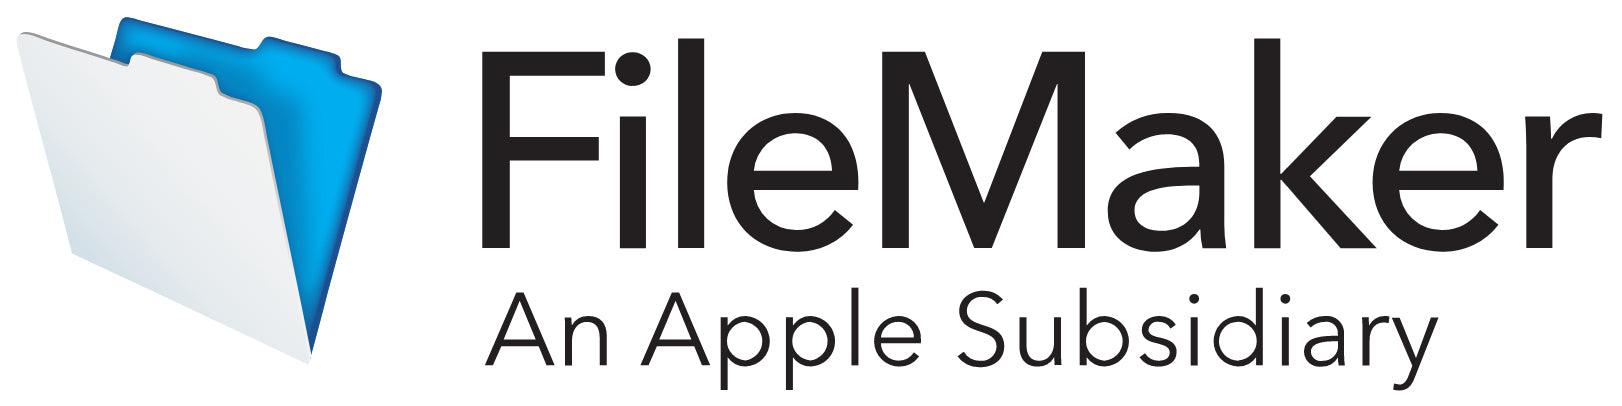 Filemaker Fm170718Ll Software License/Upgrade 1 Year(S)